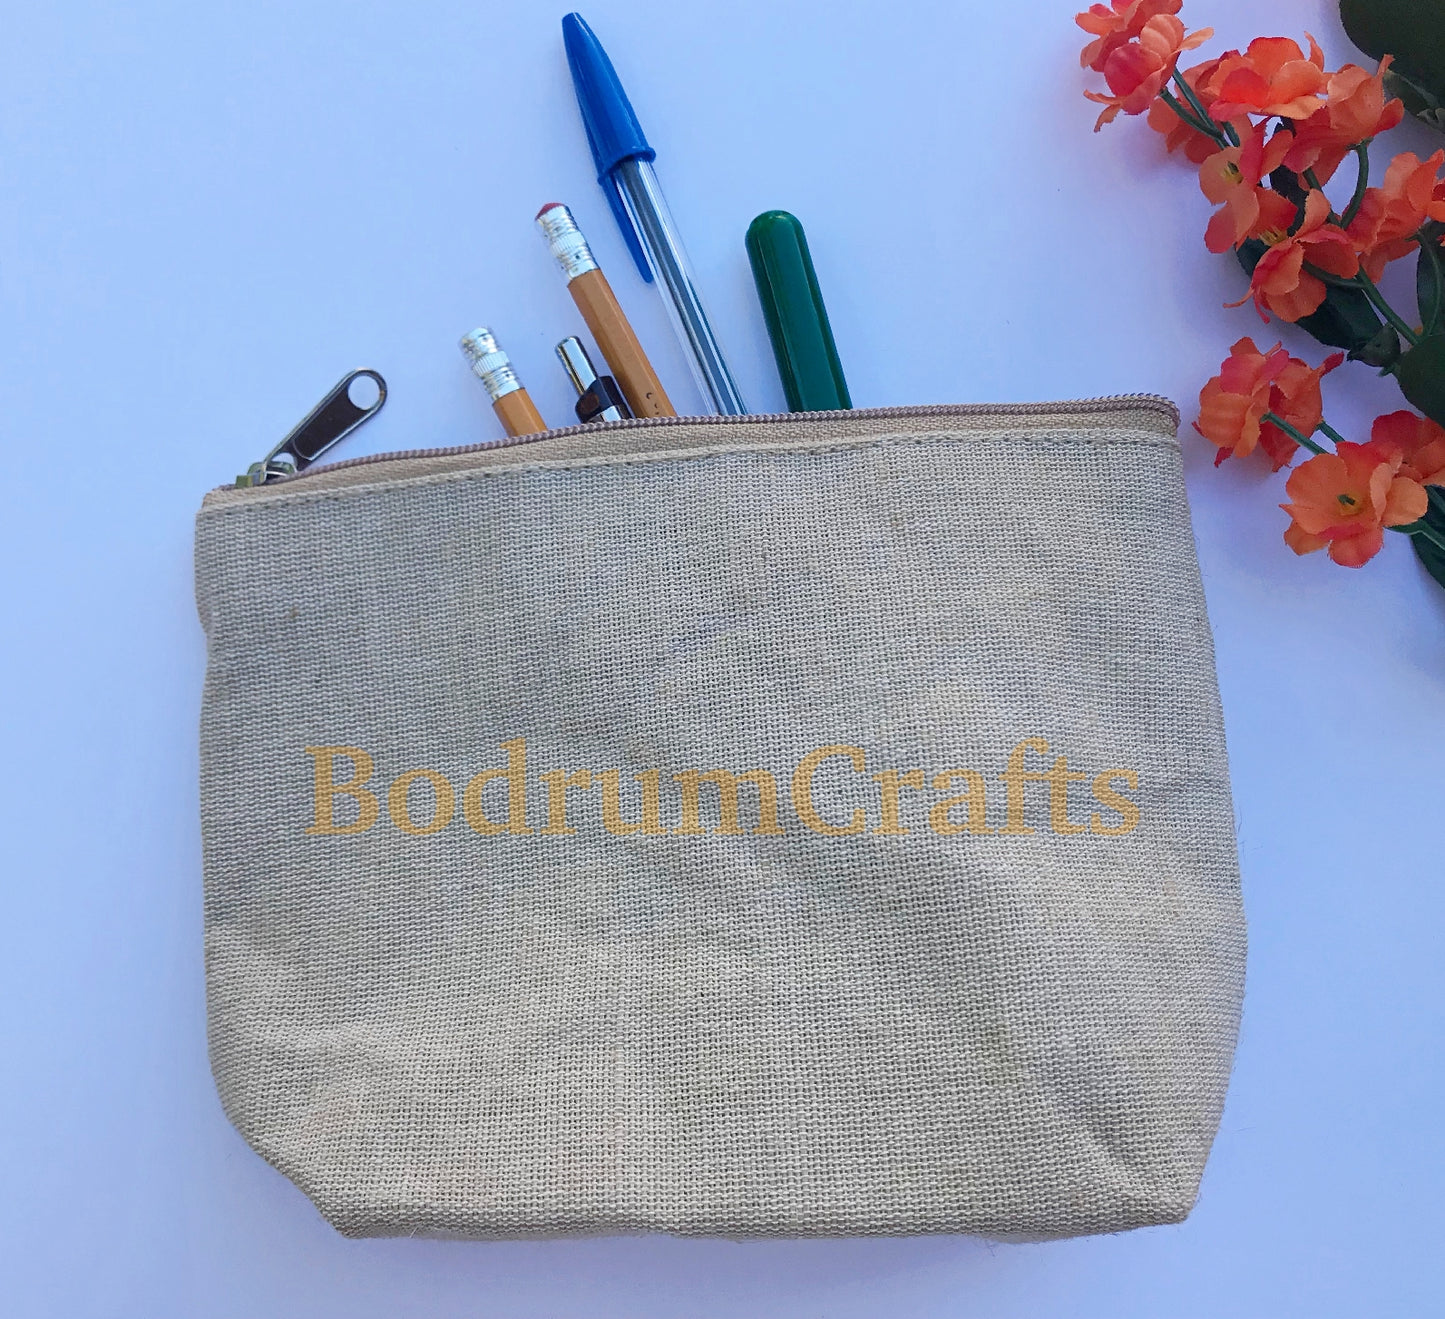 8" Jute Fabric Zippered Pouch Bags with Gusset, Cosmetic Makeup Bags Wholesale Bulk